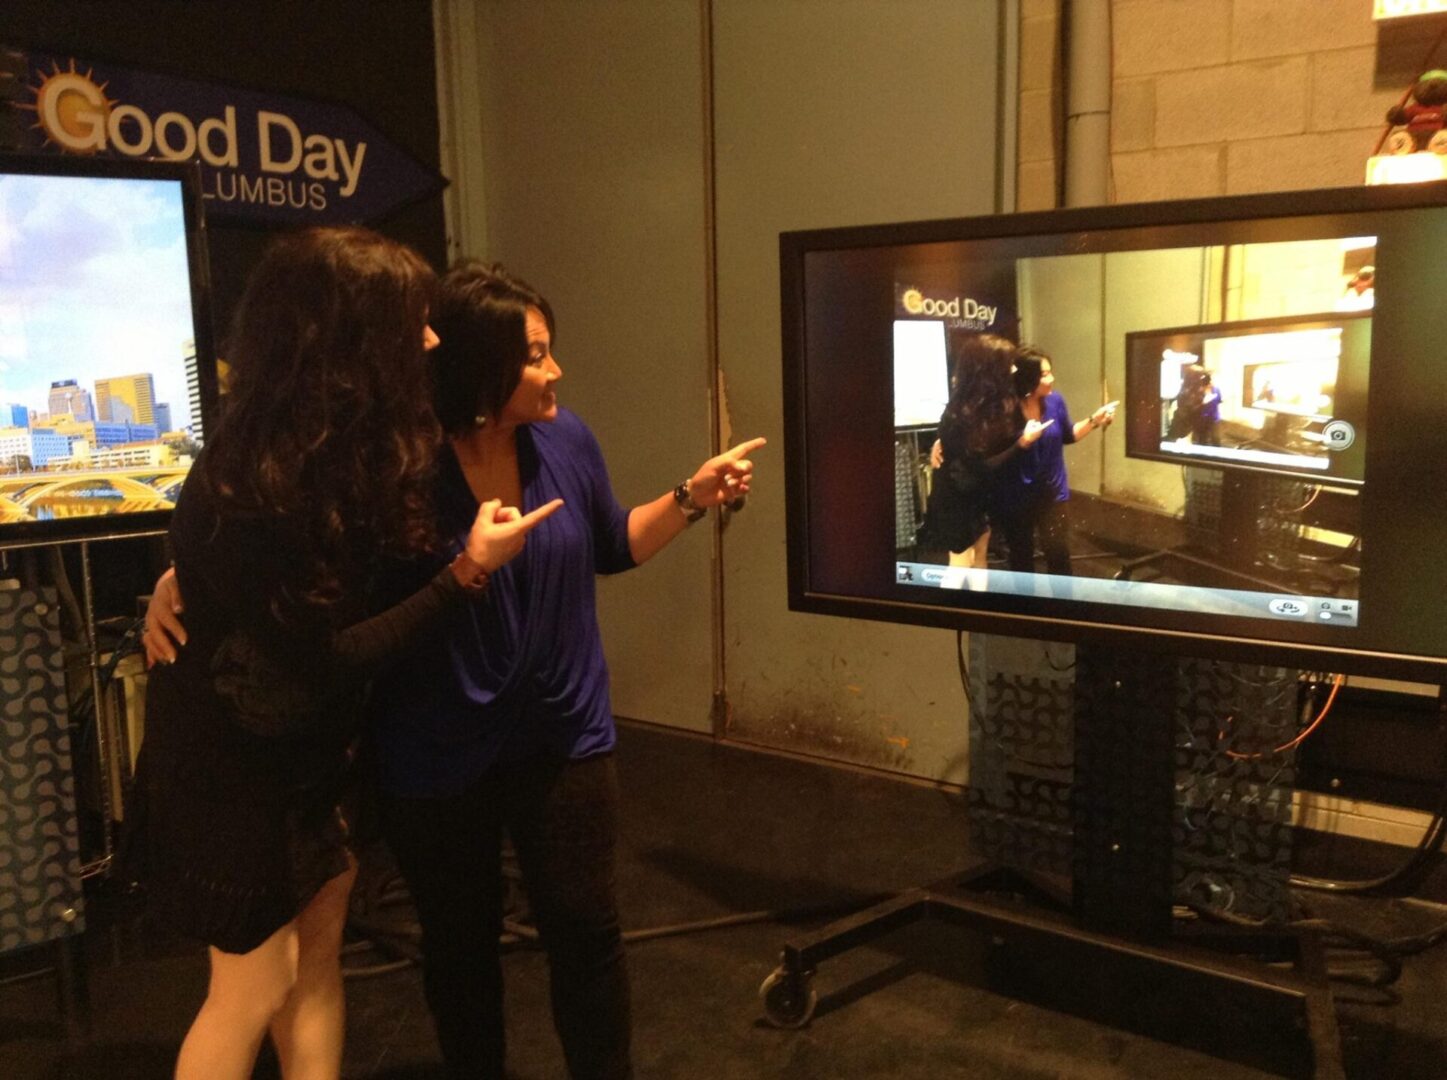 Two women are playing a video game on the tv.